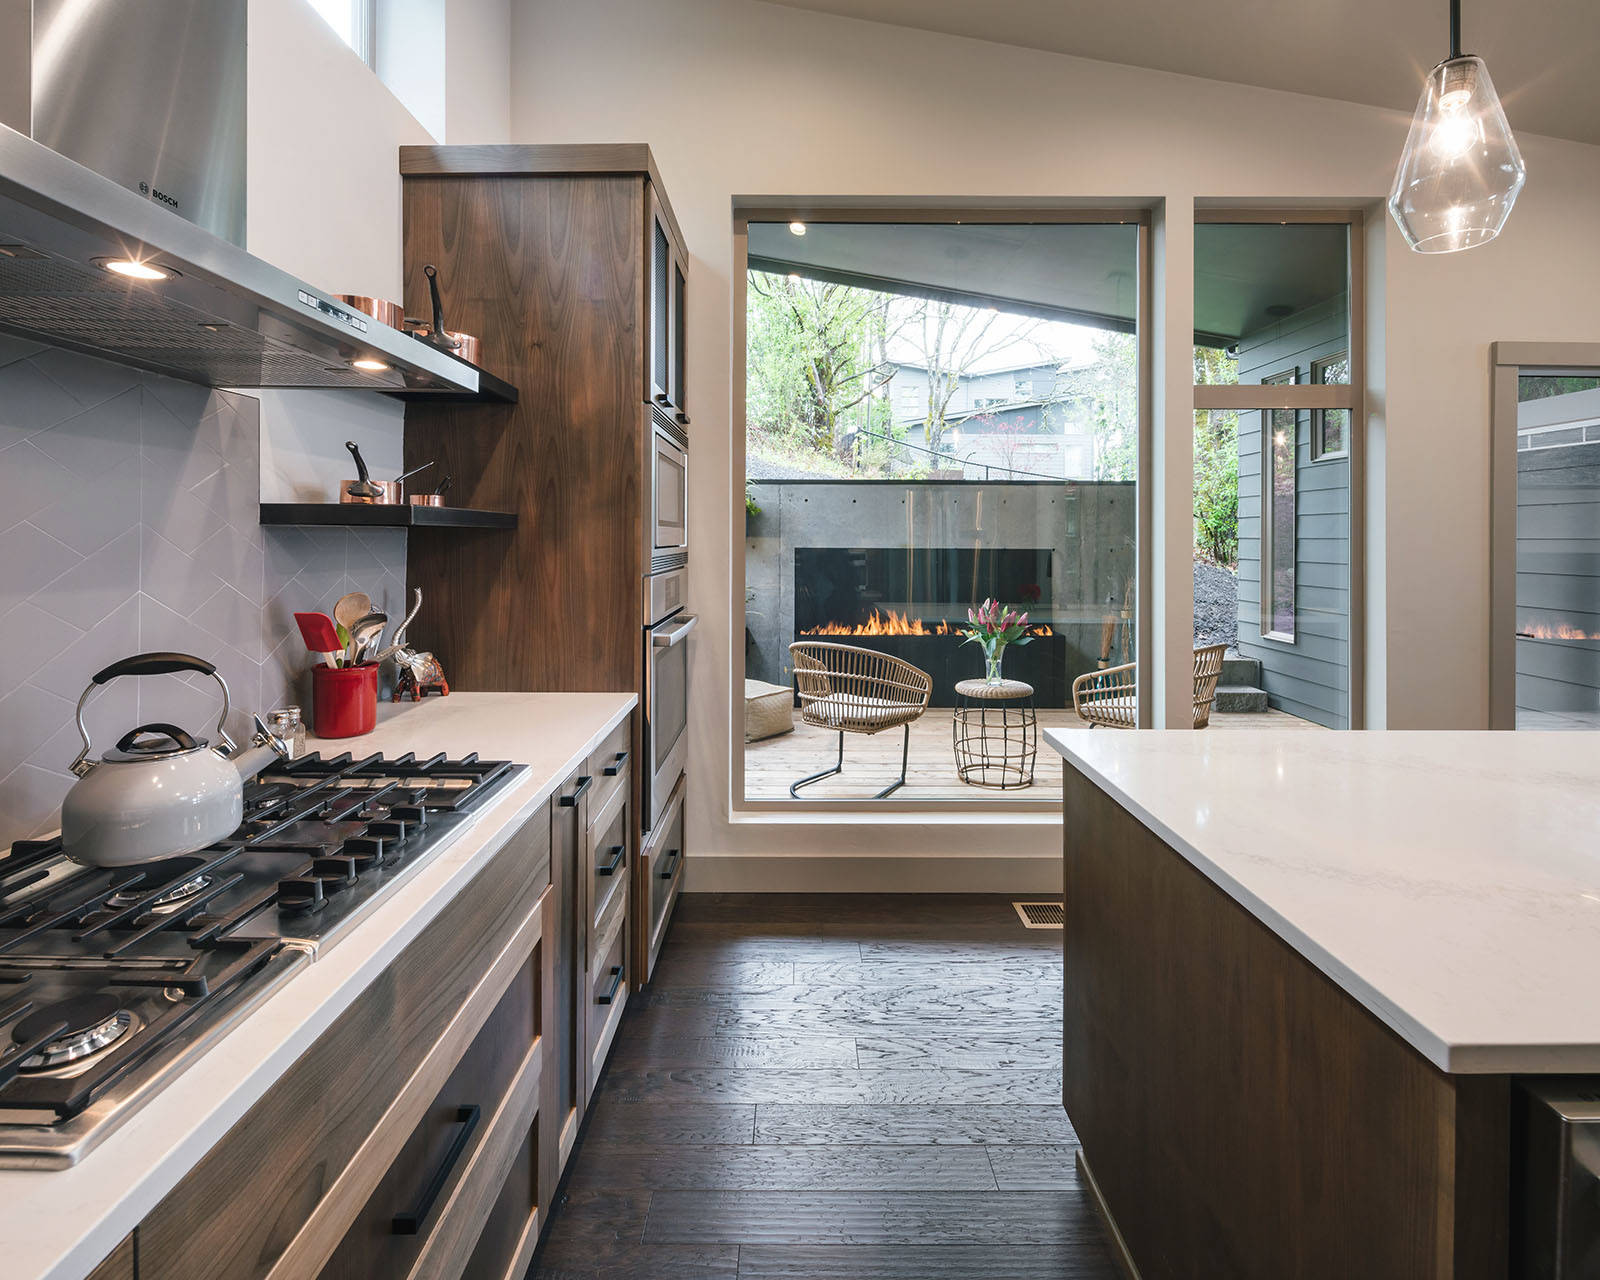 75 Beautiful Kitchen With Brown Cabinets Pictures Ideas June 2021 Houzz